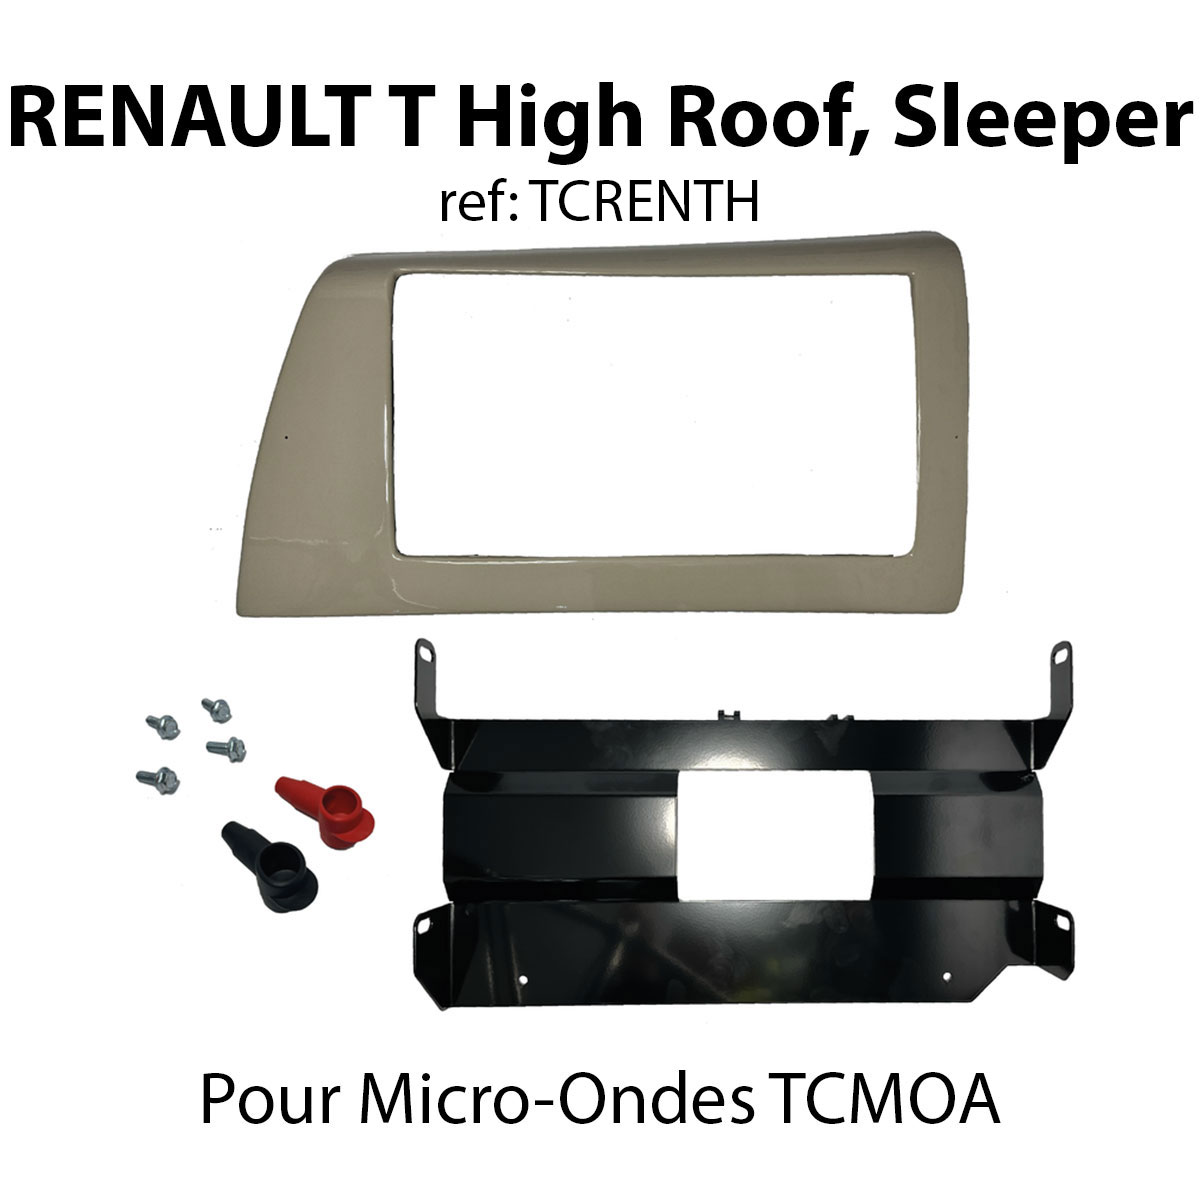 RENAULT T High Roof, Sleeper (Kit de fixation Micro-ondes TCMOA)